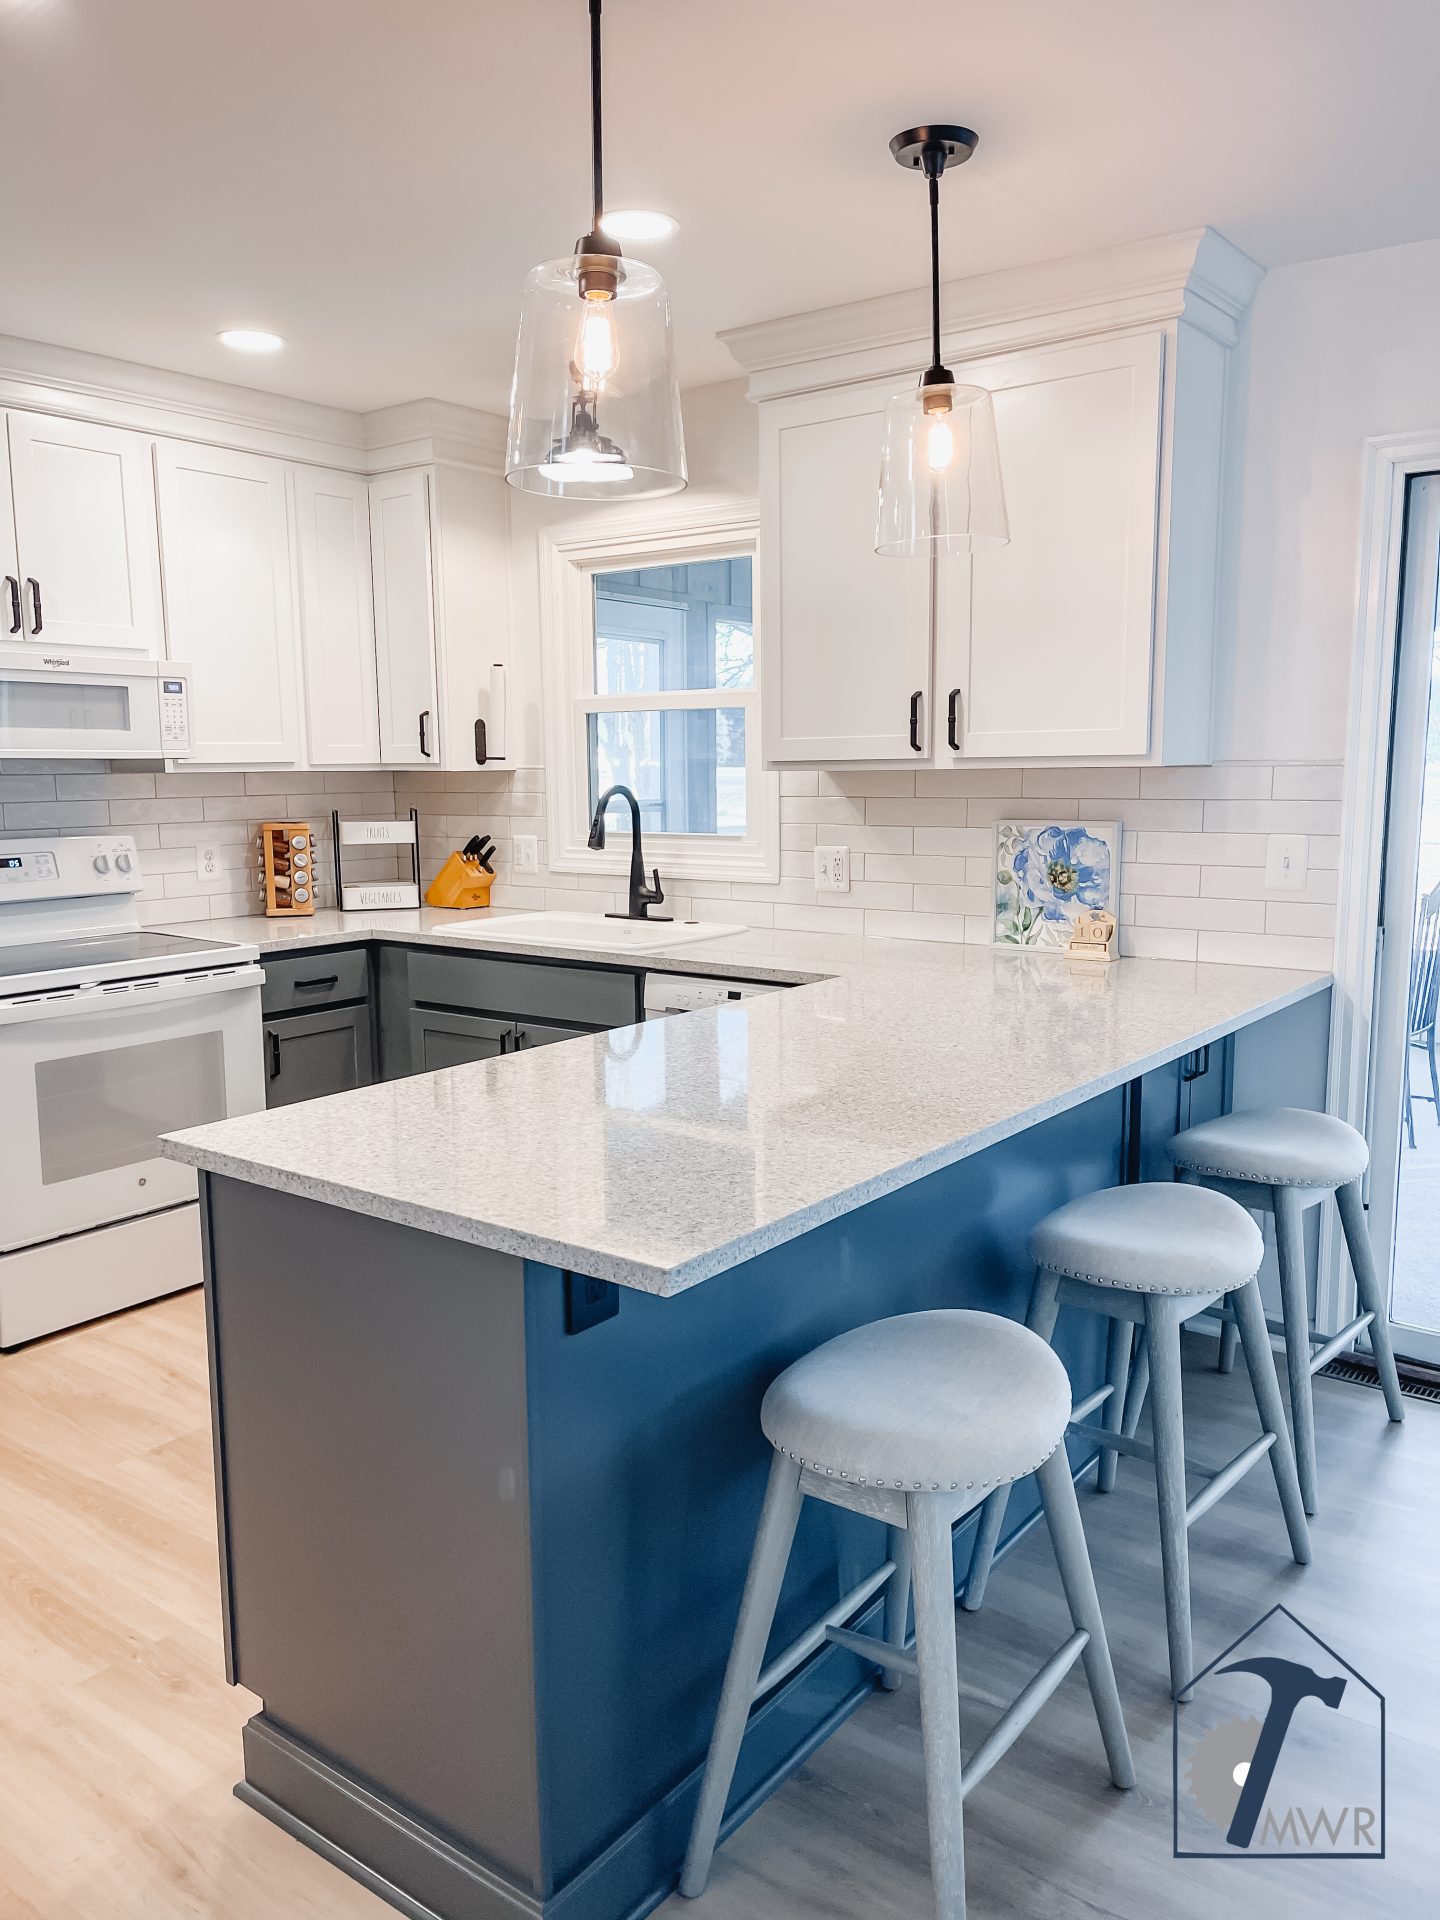 Midwest Remodel can provide the kitchen remodel of your dreams!